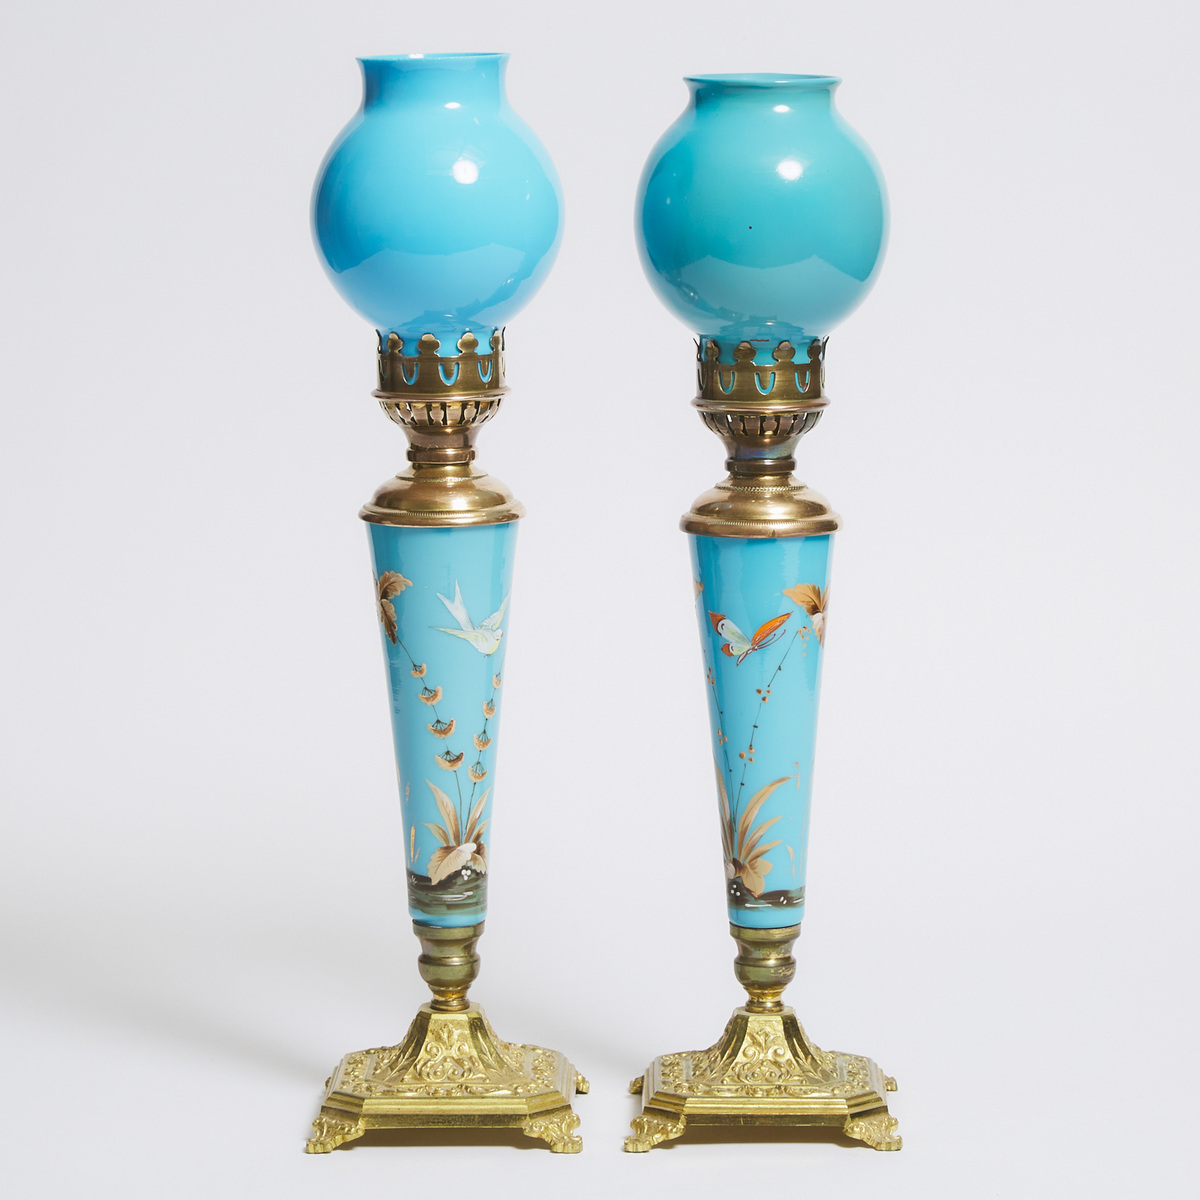 Pair of Victorian Aesthetic Movement Banquet Table Lamps, c.1870, height 18 in — 45.7 cm